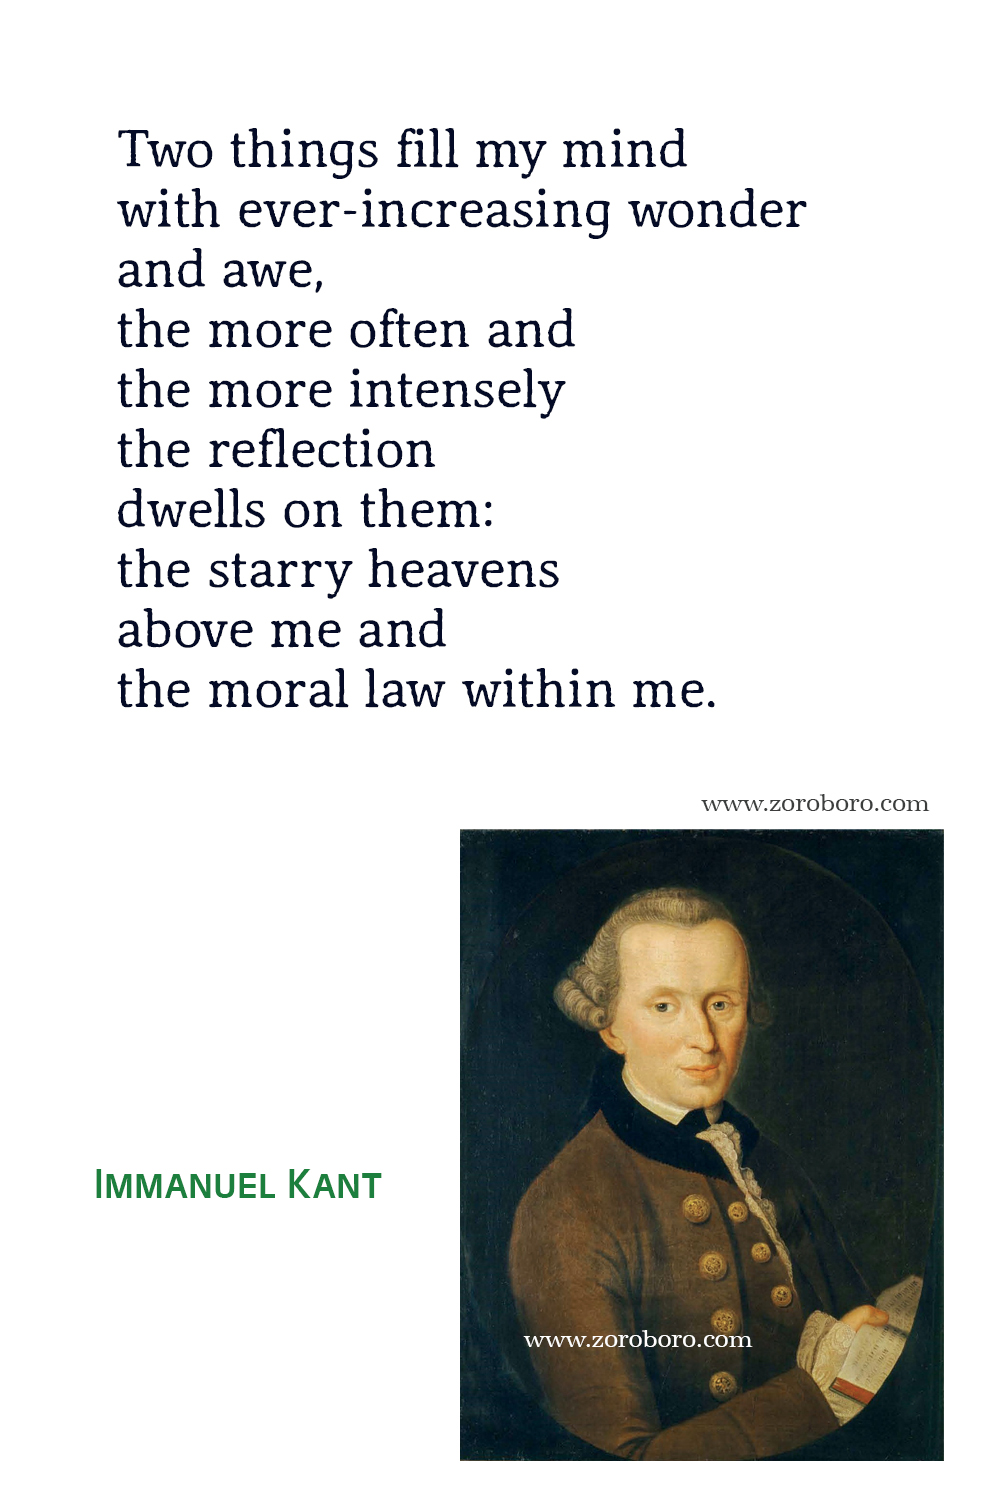 Immanuel Kant Quotes. Immanuel Kant Philosophy, Immanuel Kant Books, Kantian Ethics & Education. Immanuel Kant Quotes.